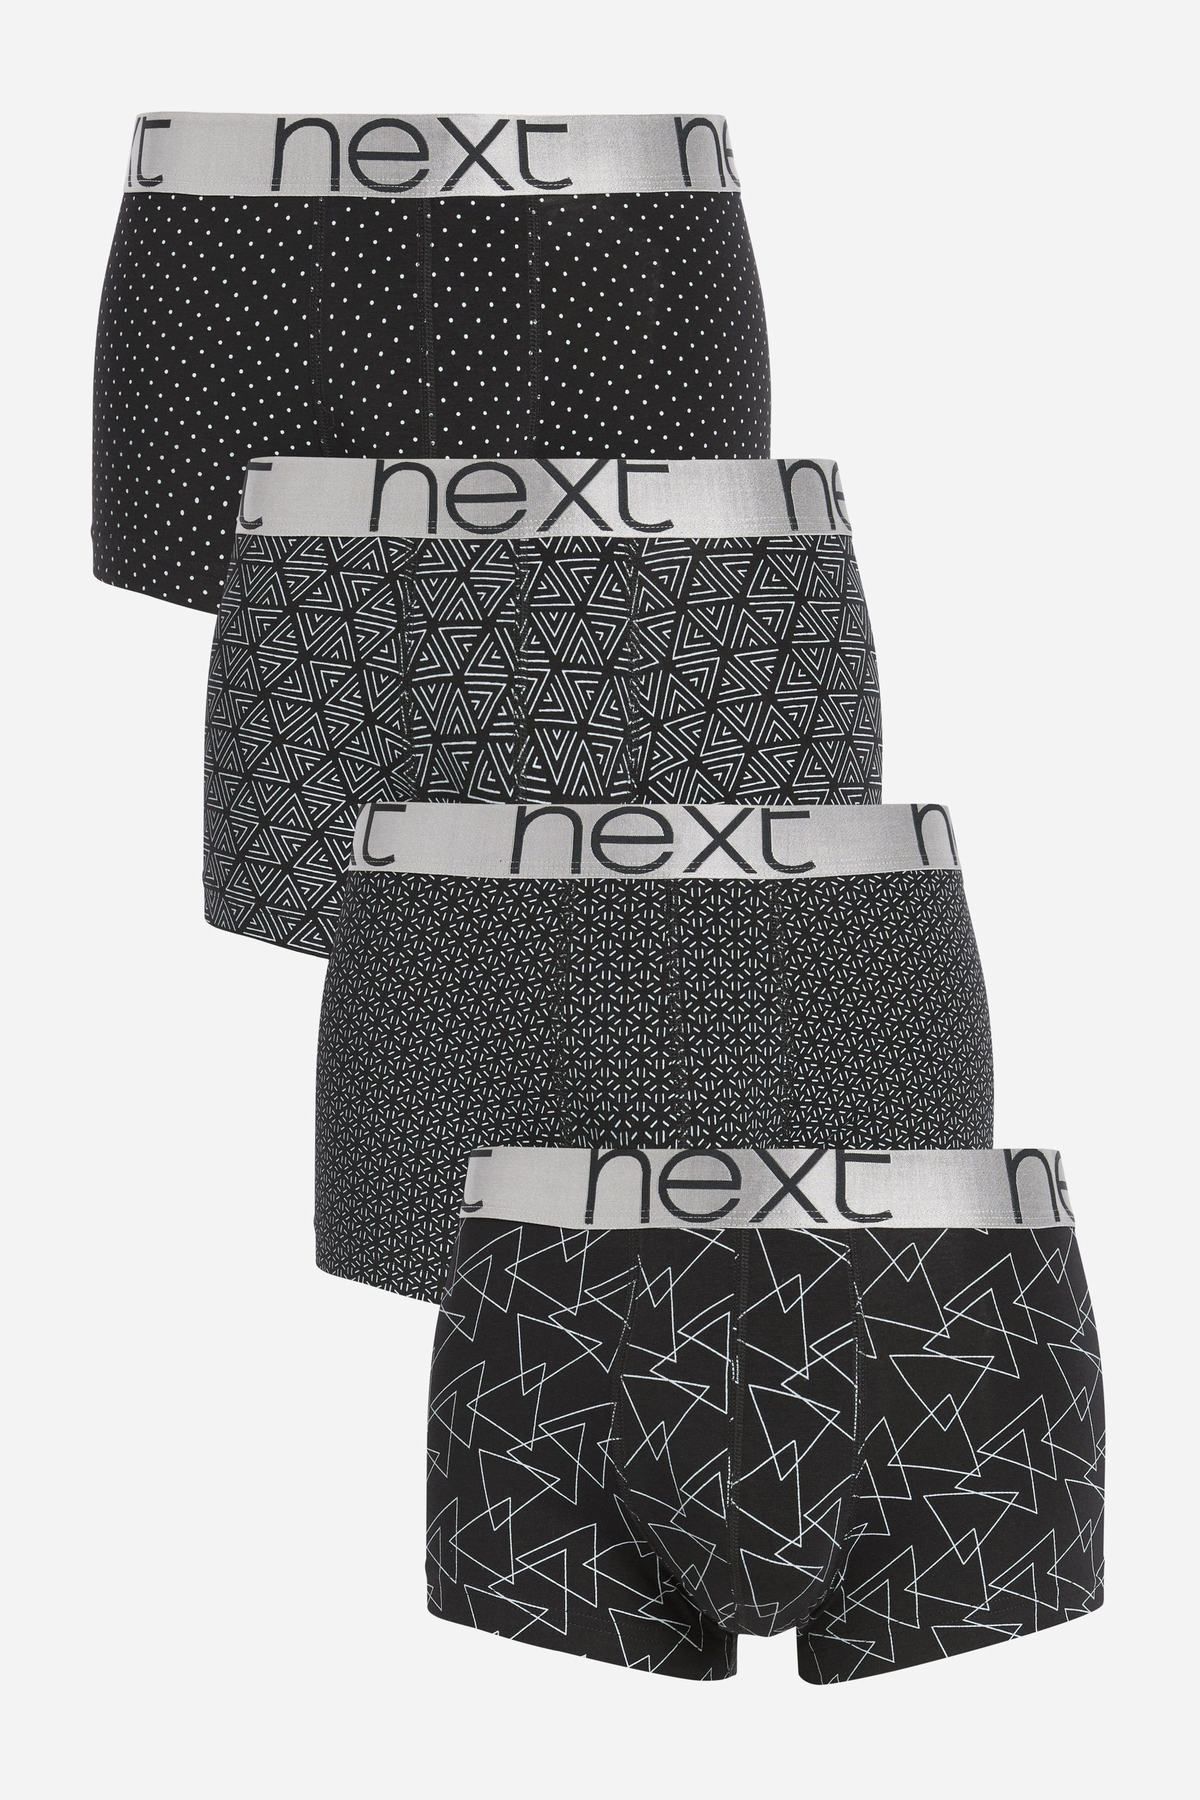 NEXT Black Hipsters Briefs Luxury Men Cotton Boxer Pack of 4 in Utako -  Clothing, Bsdirect Stores